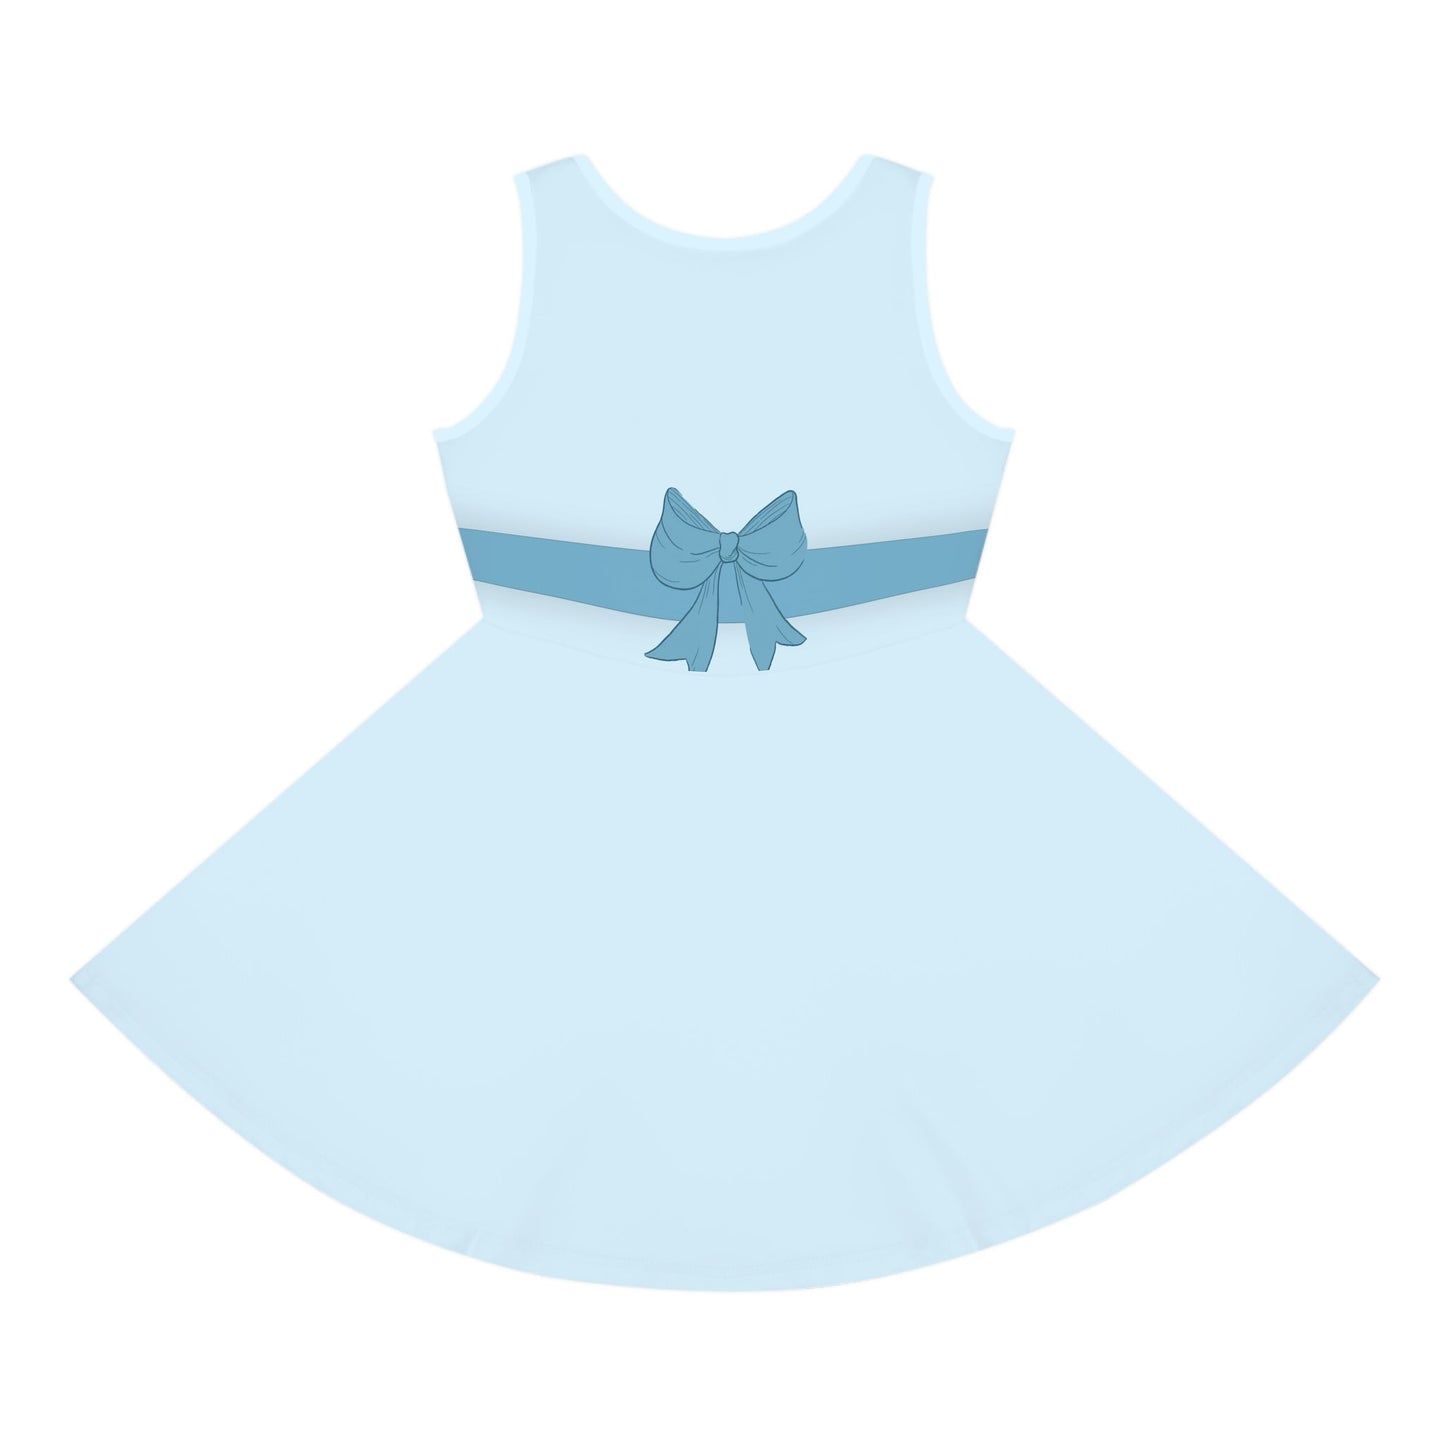 The Wendy Darling Girls' Sleeveless Sundress All Over PrintAOPAll Over PrintsWrong Lever Clothing